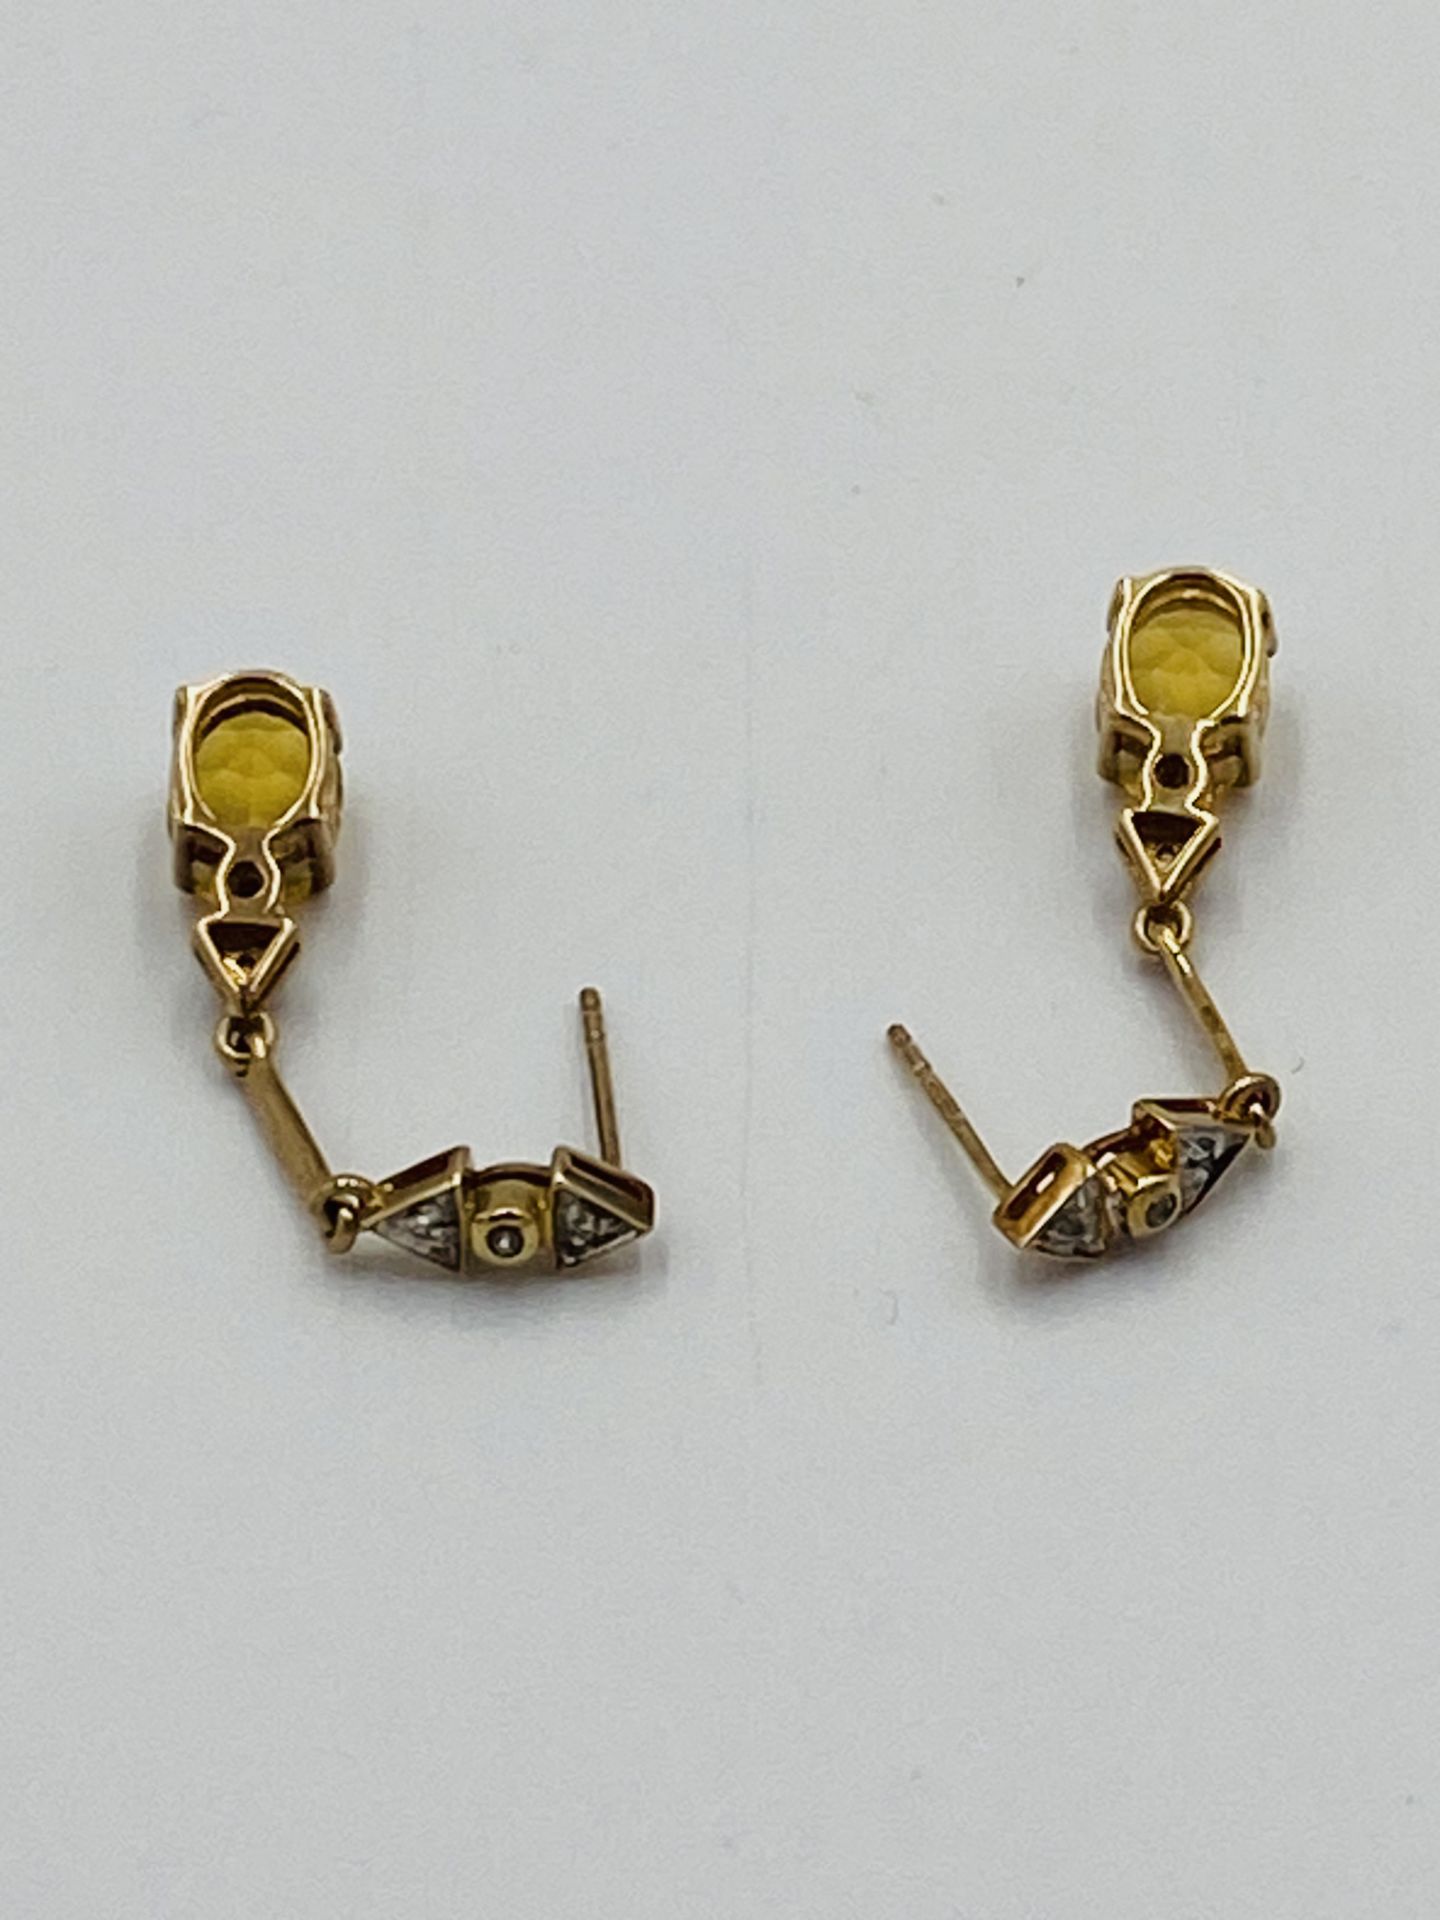 Pair of 9ct gold earrings - Image 5 of 6